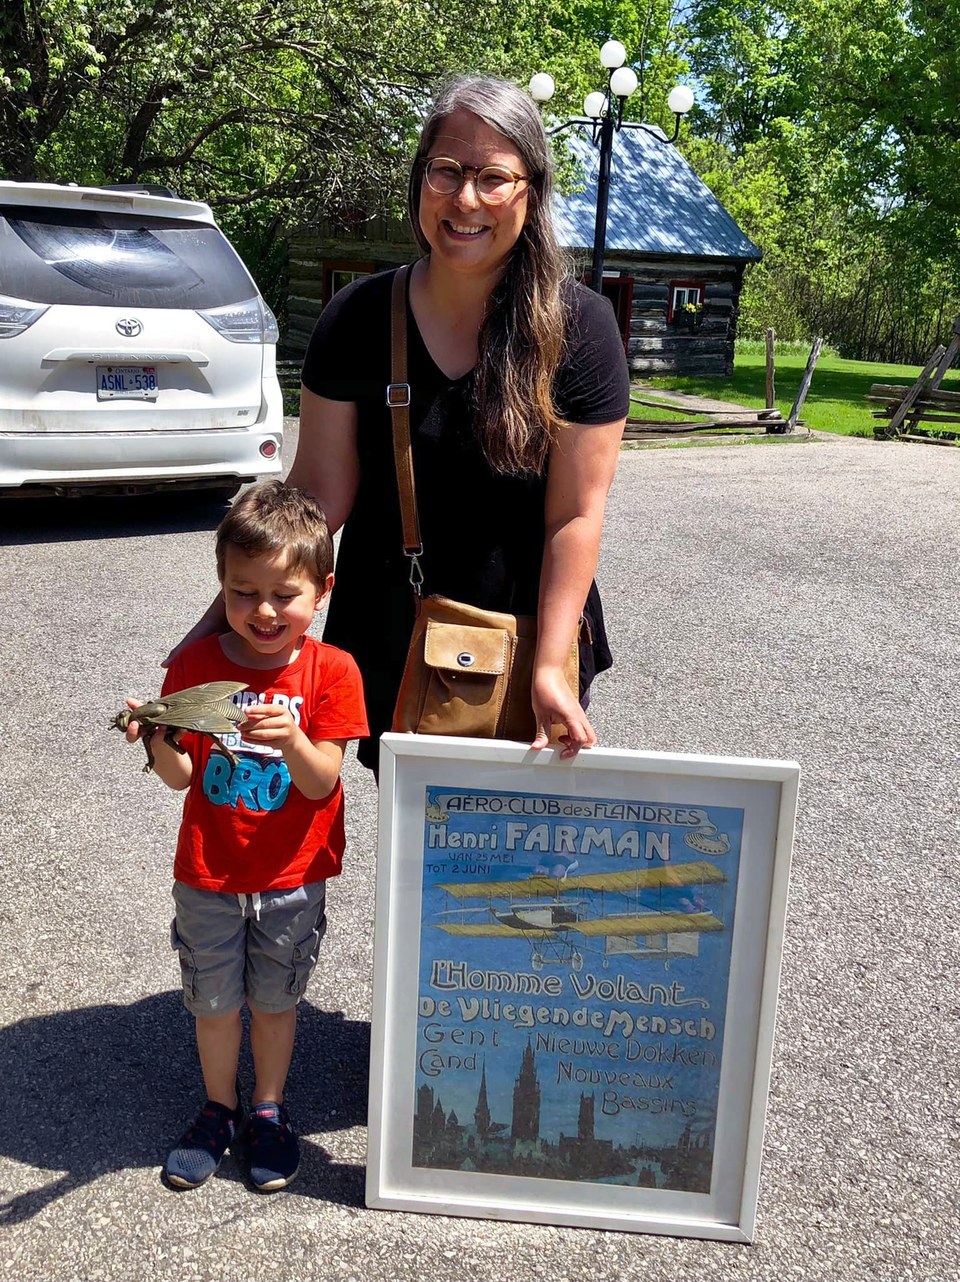 Sharing the love: Colleen Whitteker and son Asher at Country Side Antiques